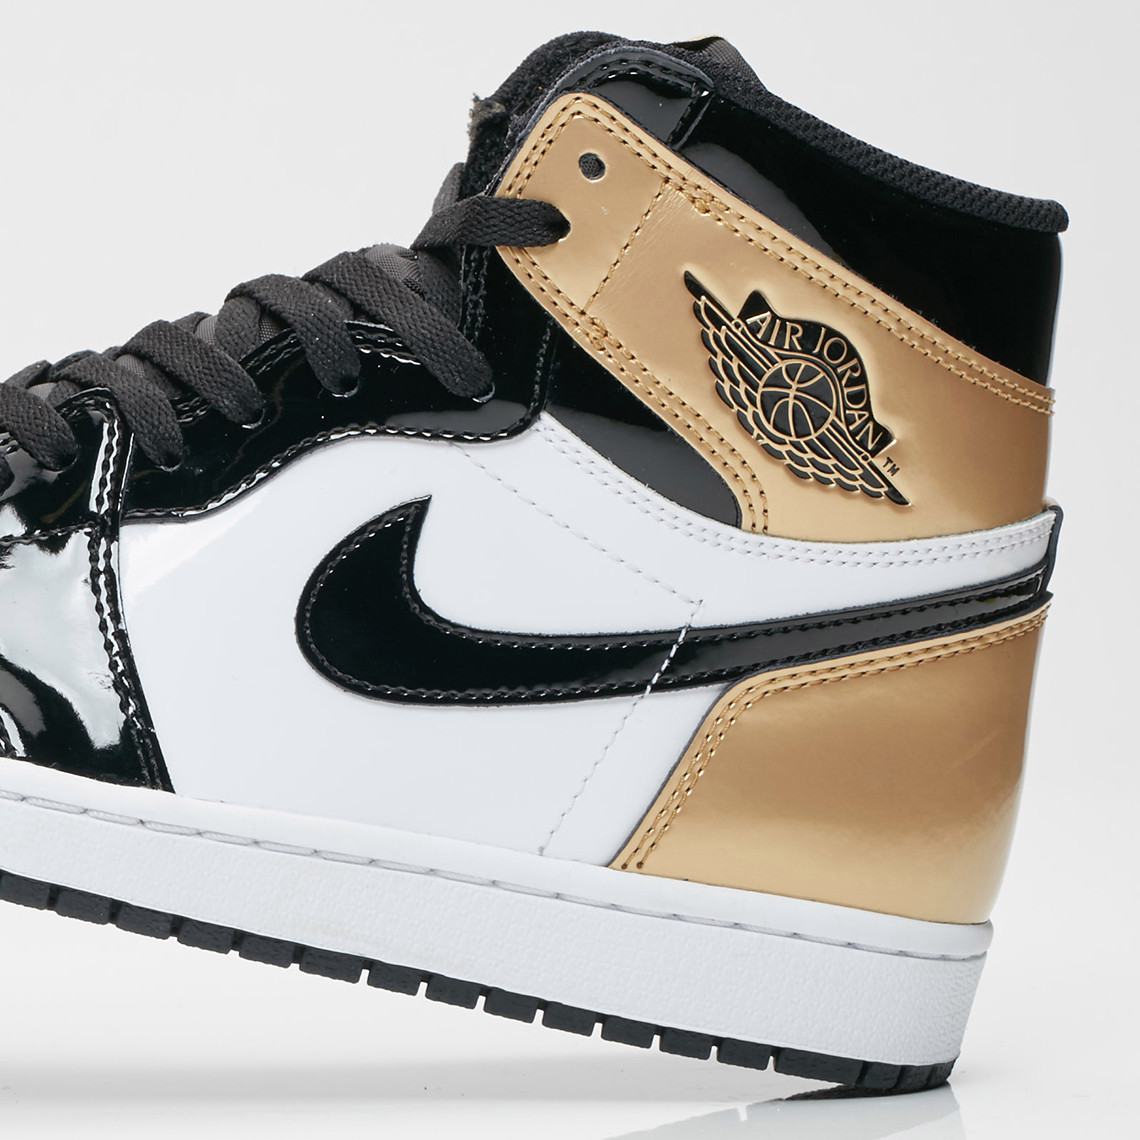 Time To Make Use Of Your 'Ang-Pow' On The Air Jordan 1 'Gold Toe' - MASSES